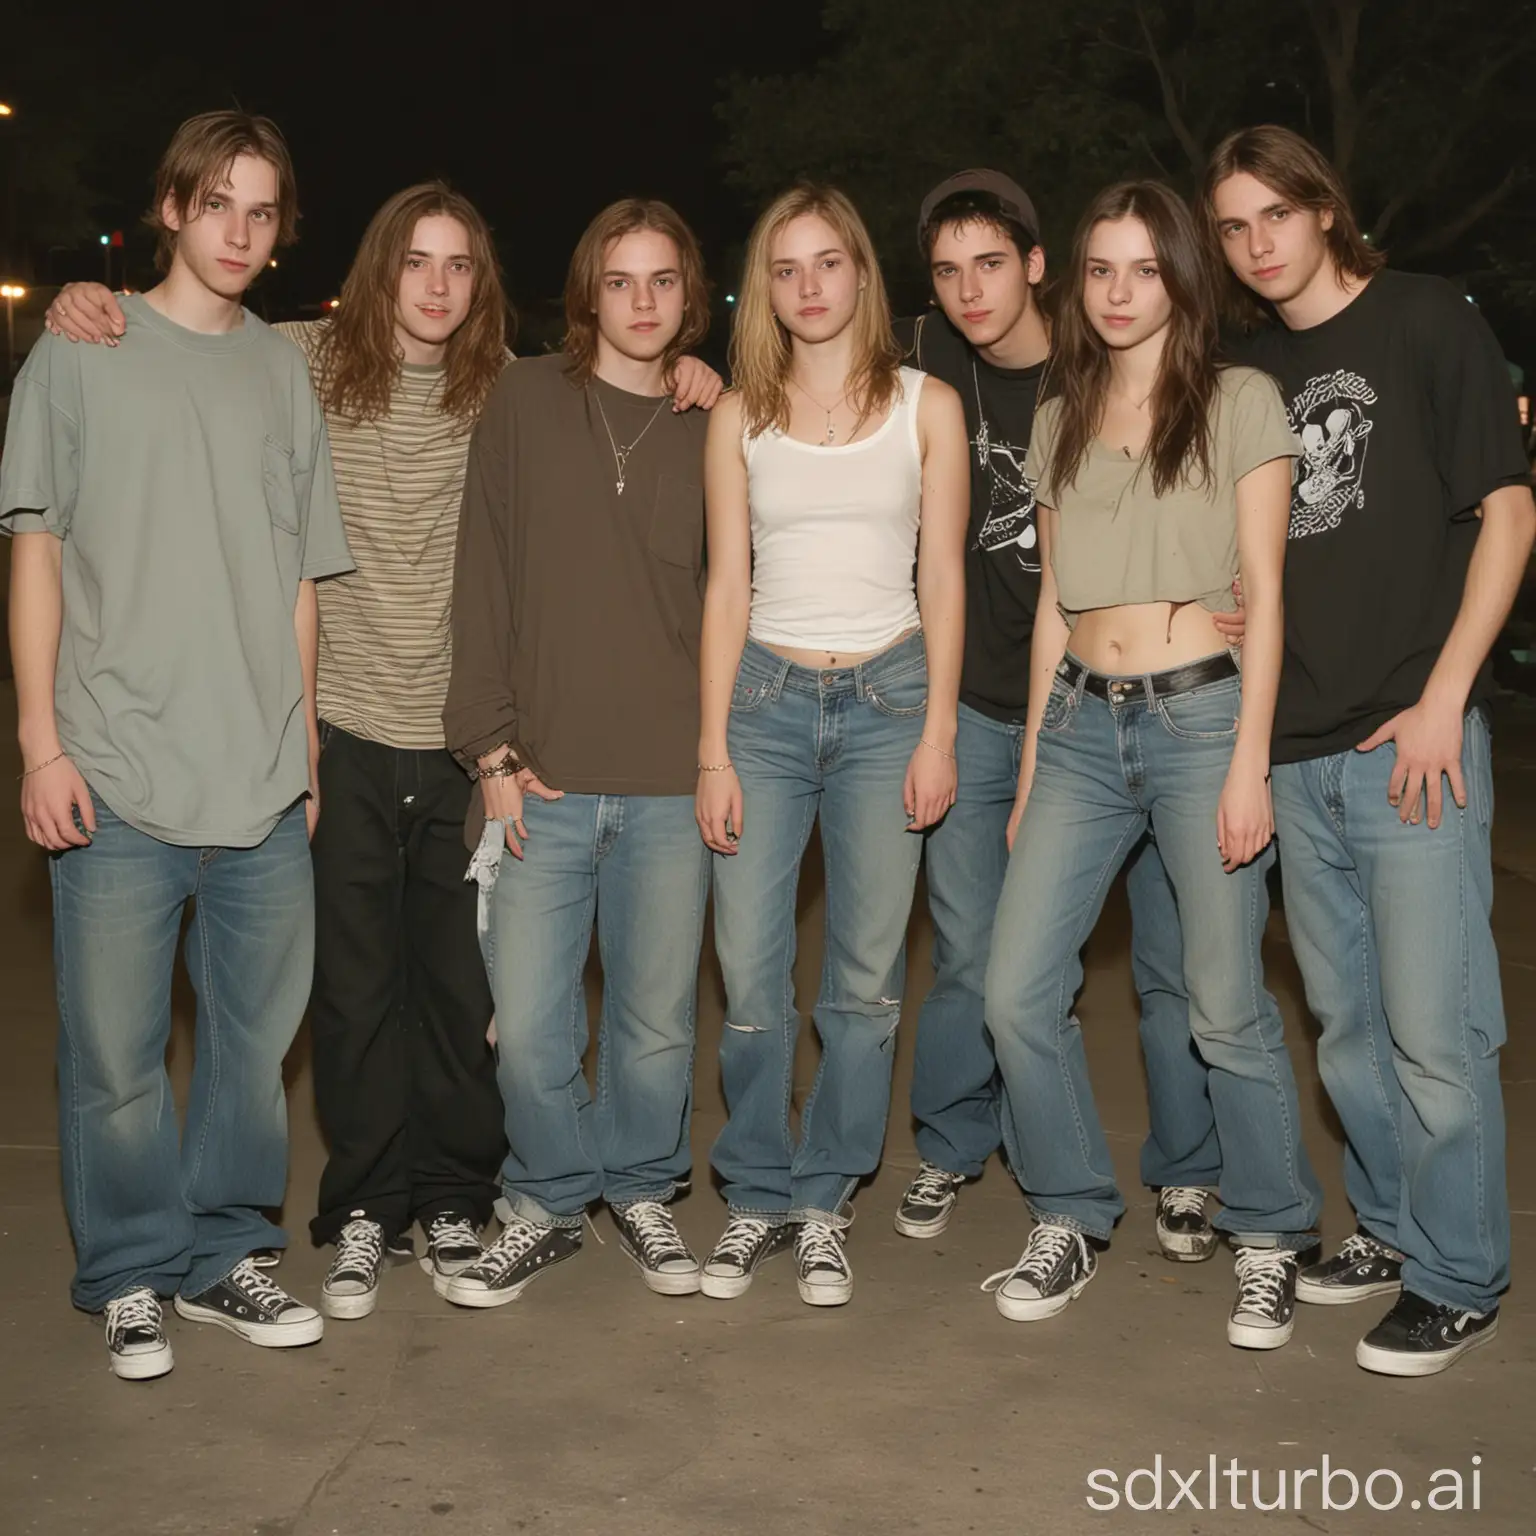 Young-Adults-in-2004-Grunge-Casual-Outfits-Gathered-for-Candid-Nighttime-Group-Photo